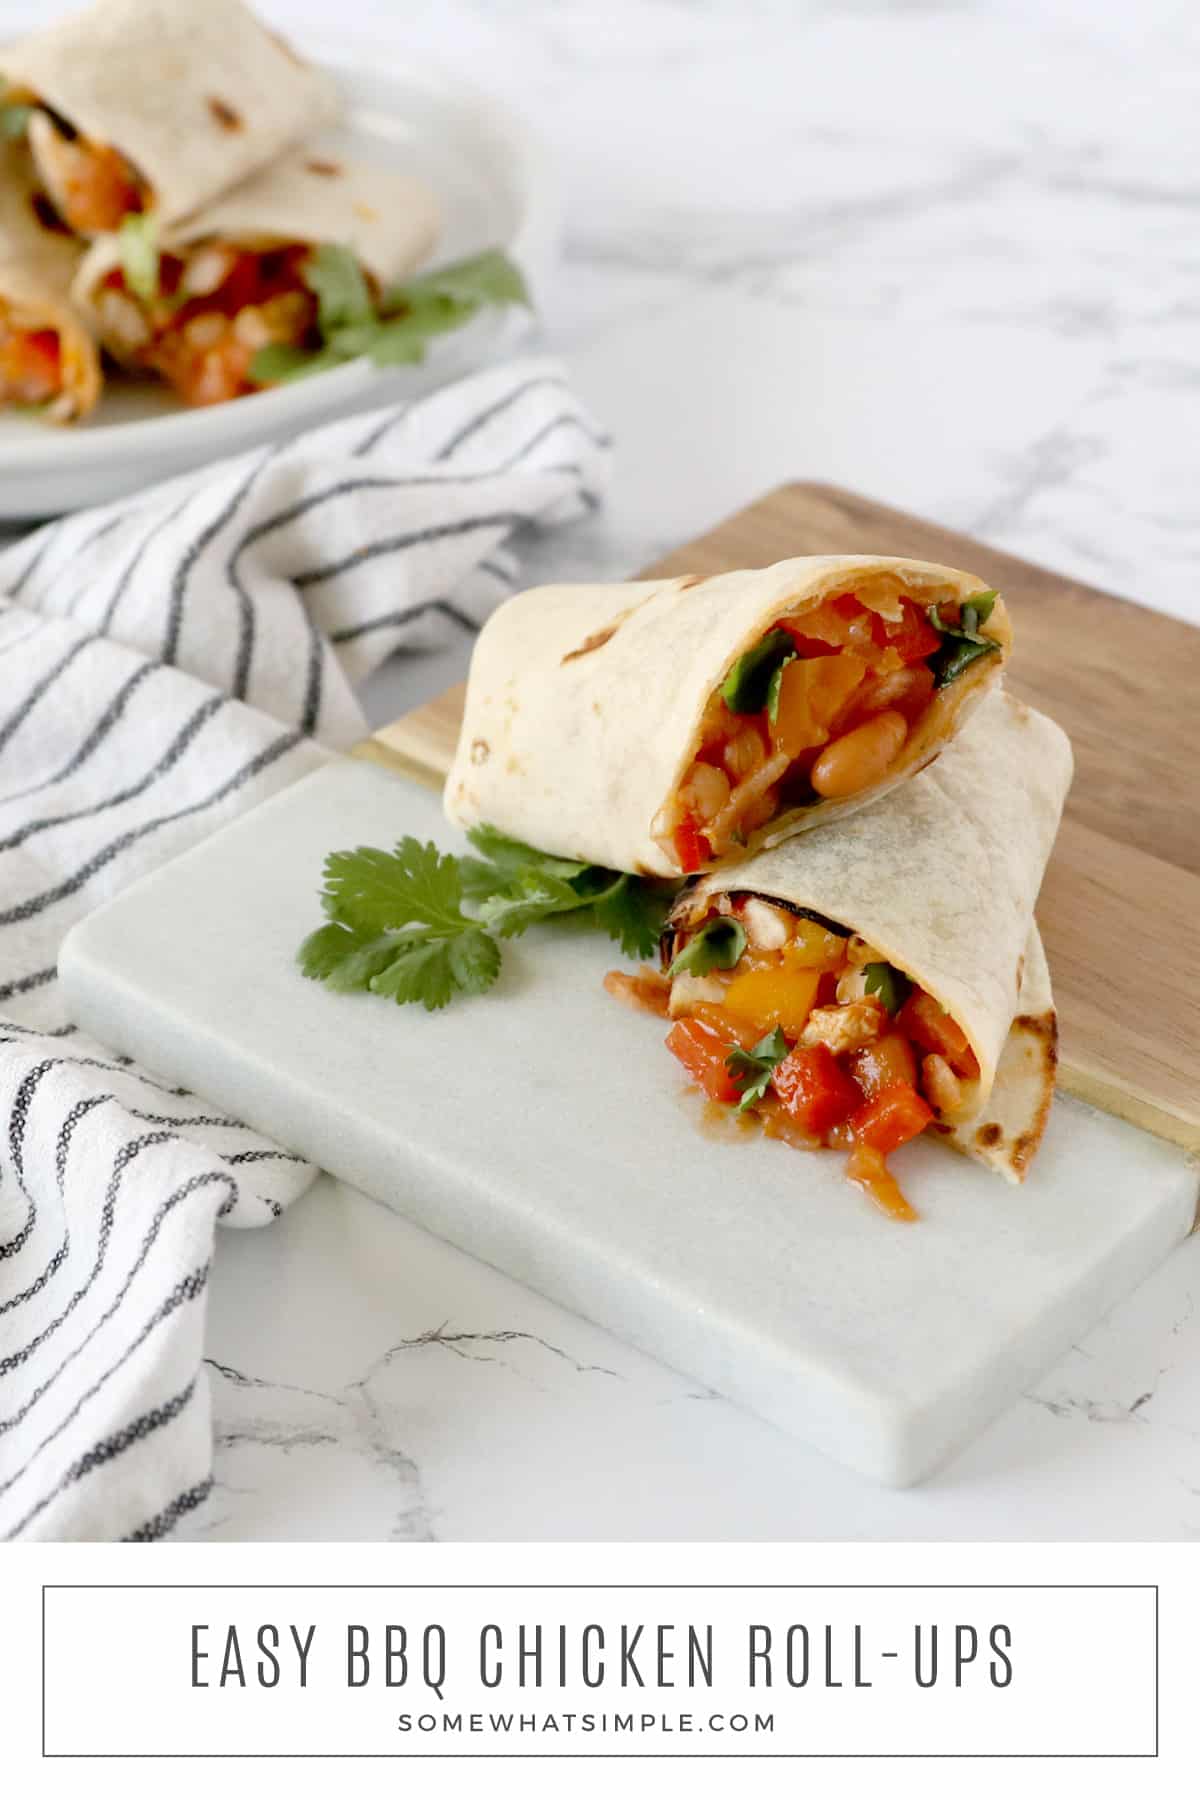 BBQ Chicken Wraps make a perfect lunch or dinner when you need something light and nutritious. They’re so tasty, you’ll want to go back for more! via @somewhatsimple